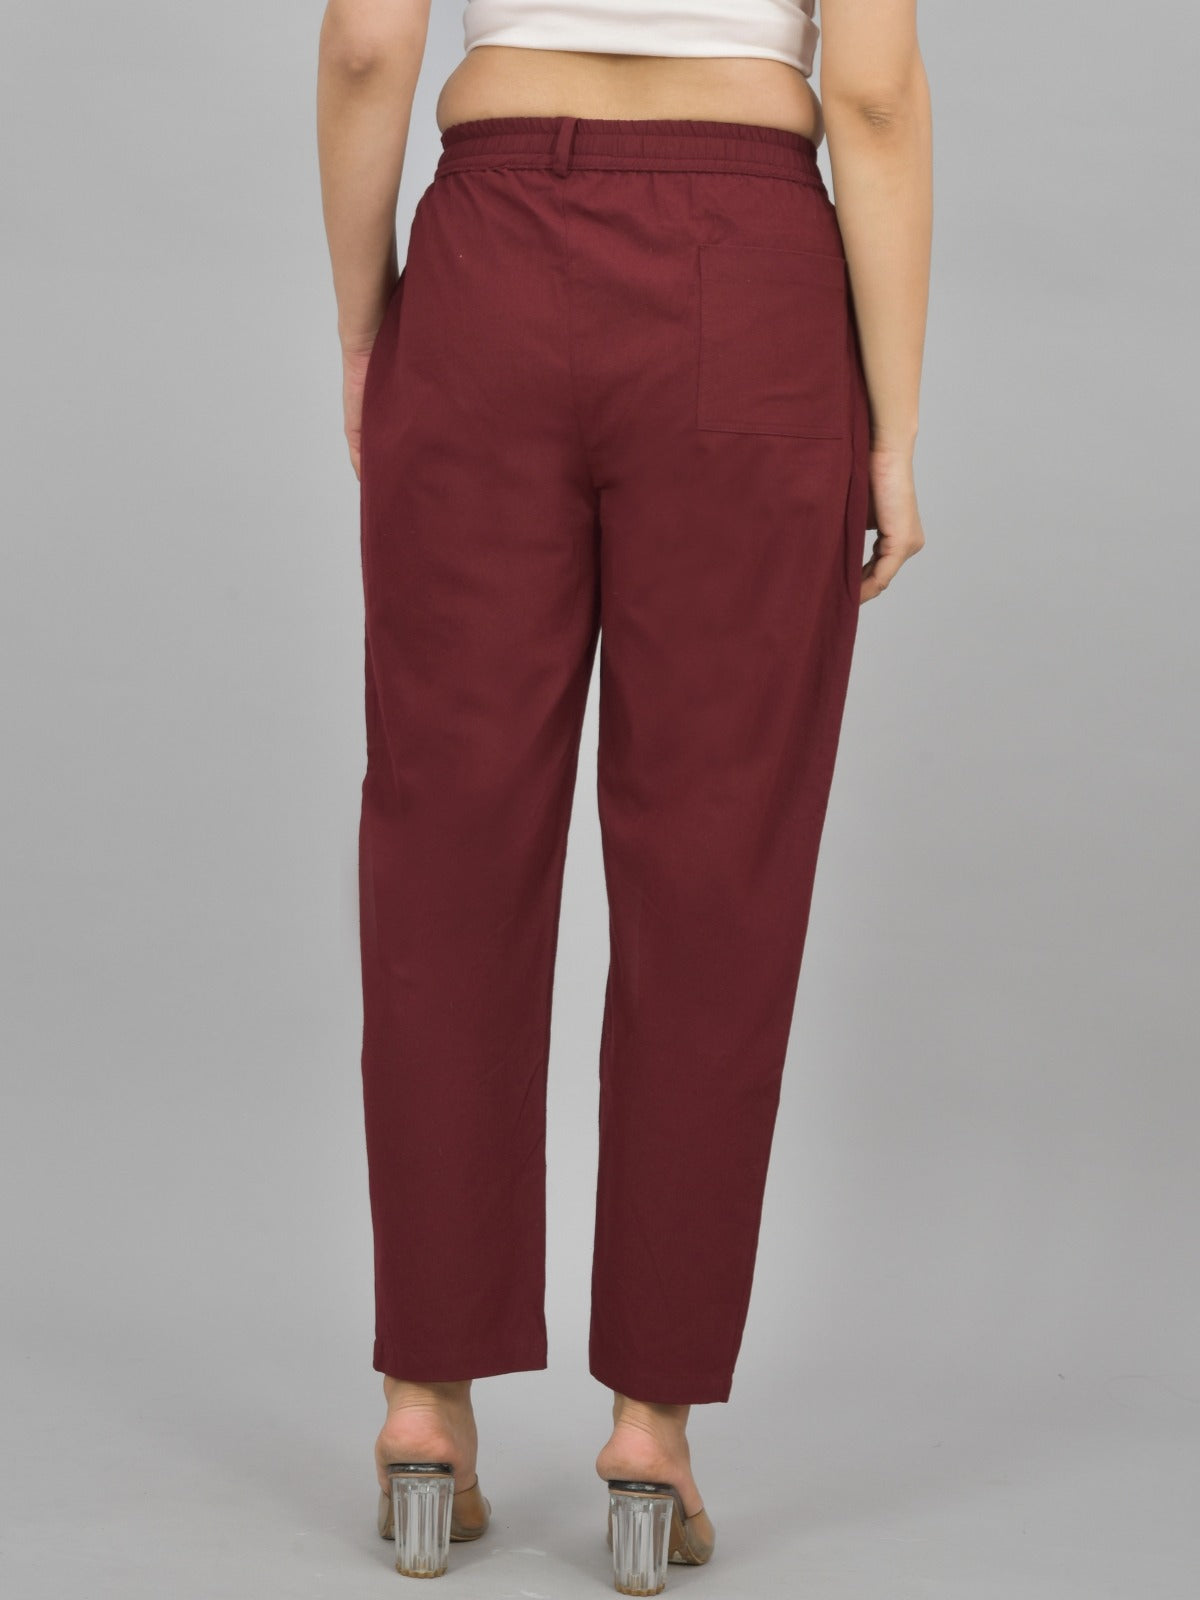 Combo Pack Of 2 Navy Blue And Wine Womens Cotton Formal Pants